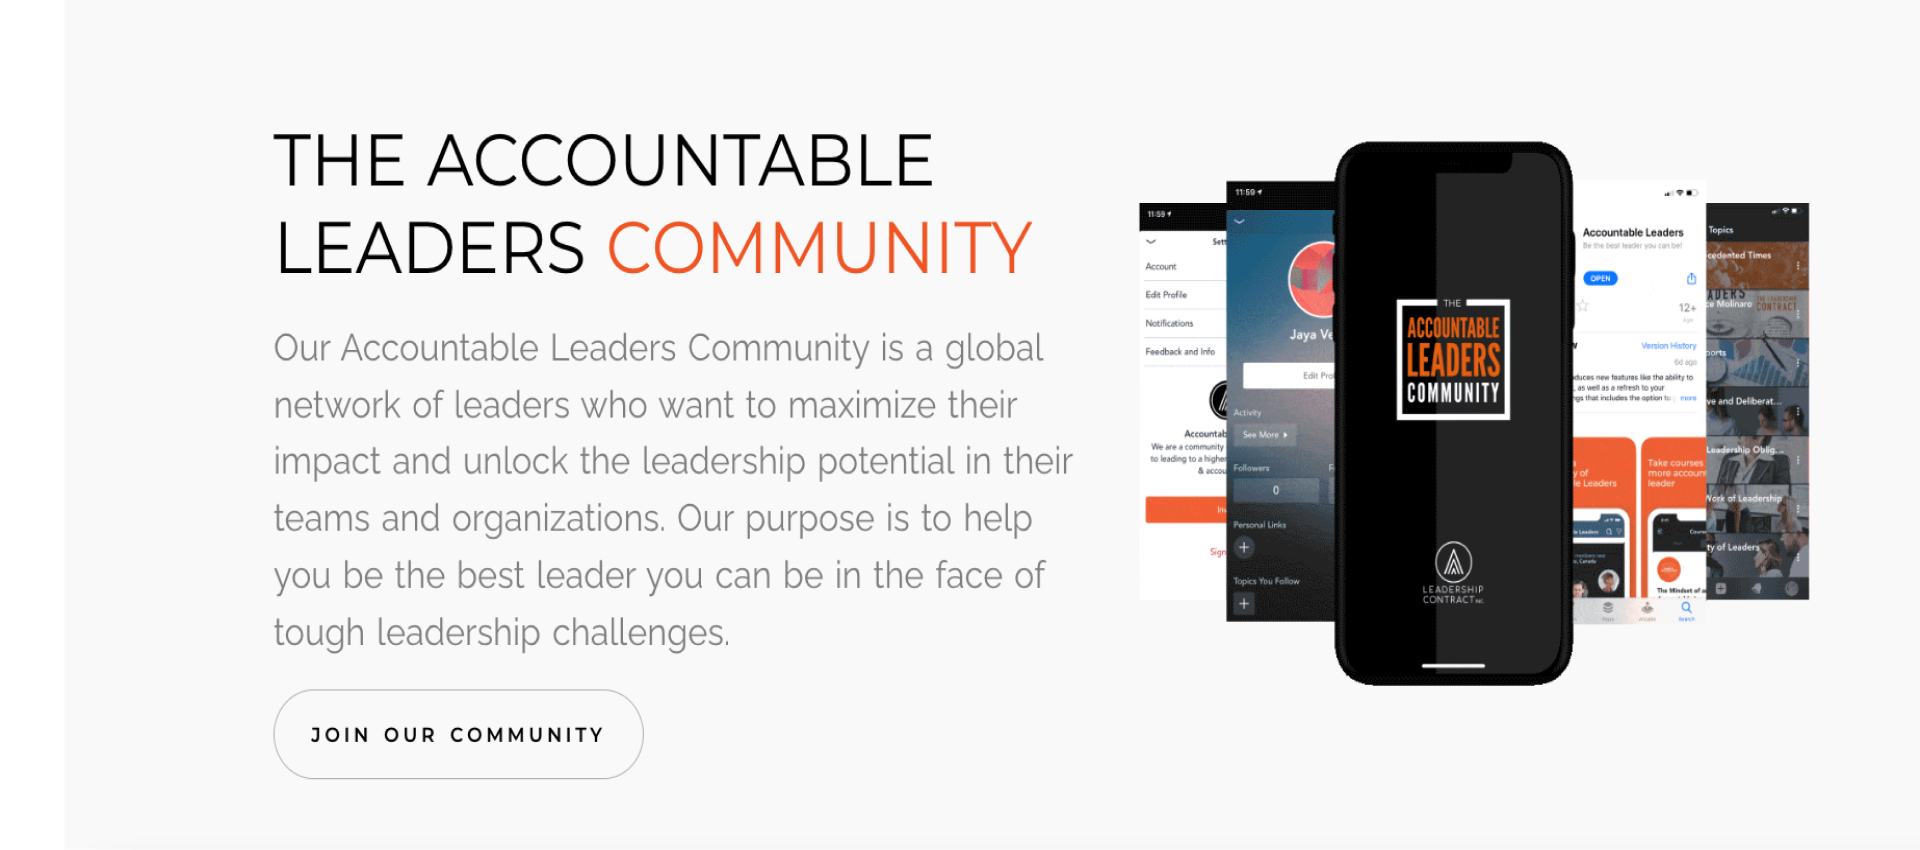 The Accountable Leaders Community